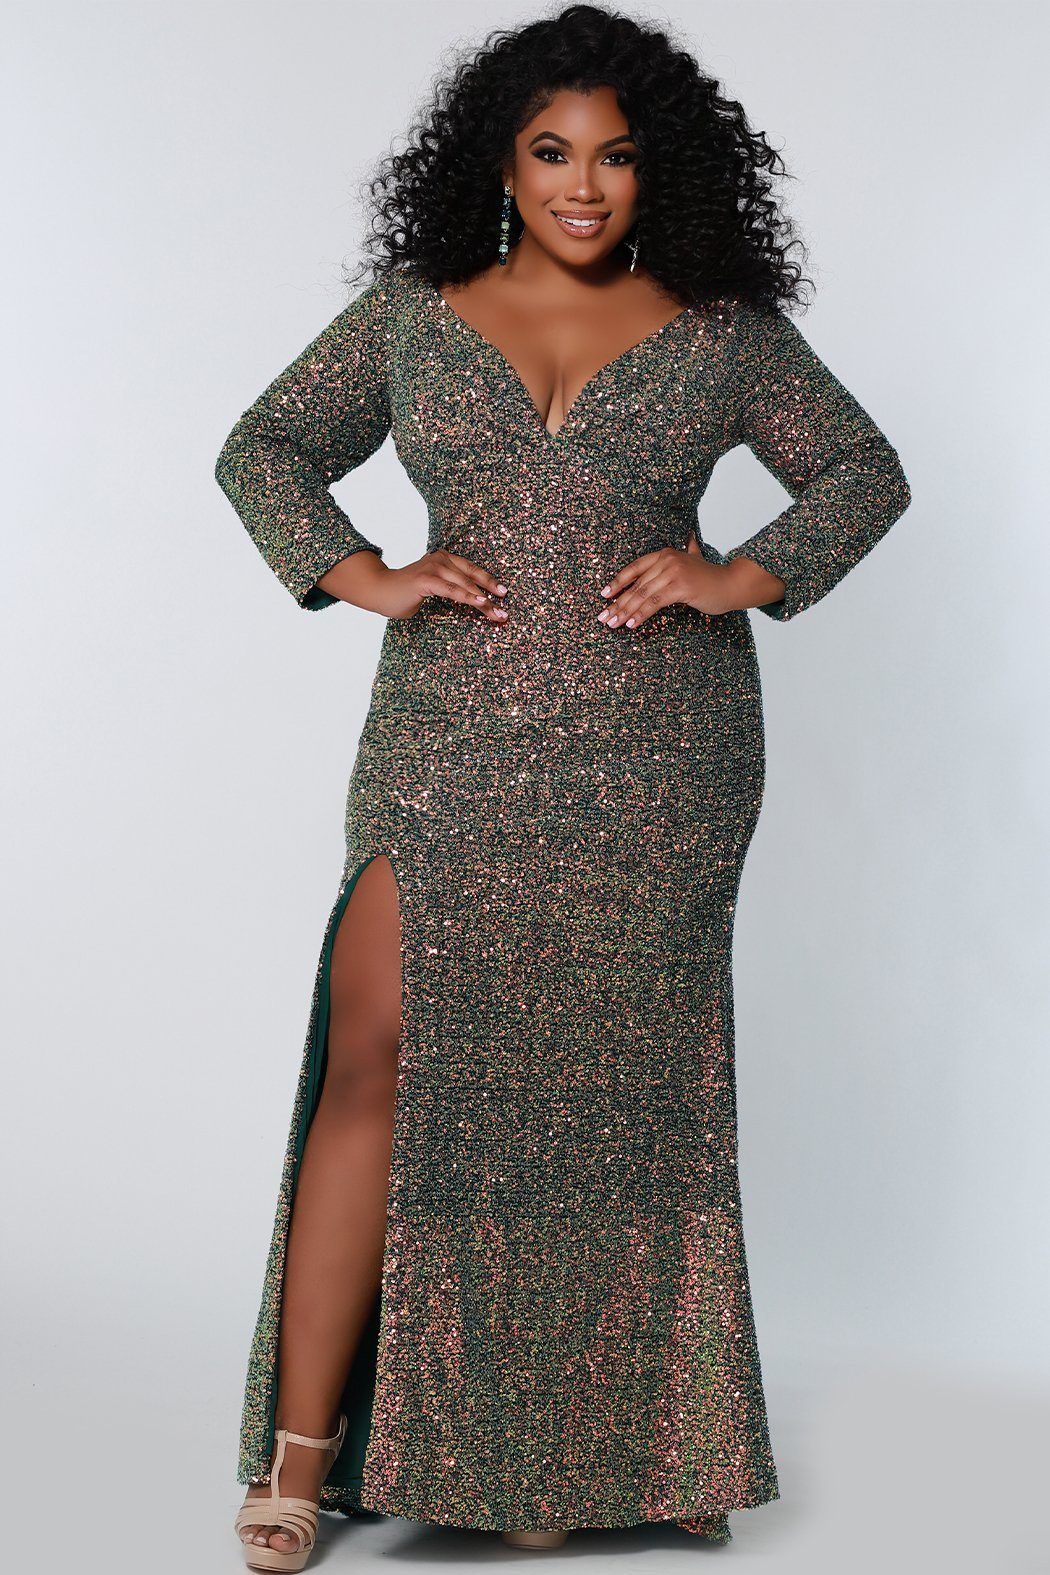 Style SC7333 Sydney's Closet Plus Size 26 Sequined Green Side Slit Dress on Queenly